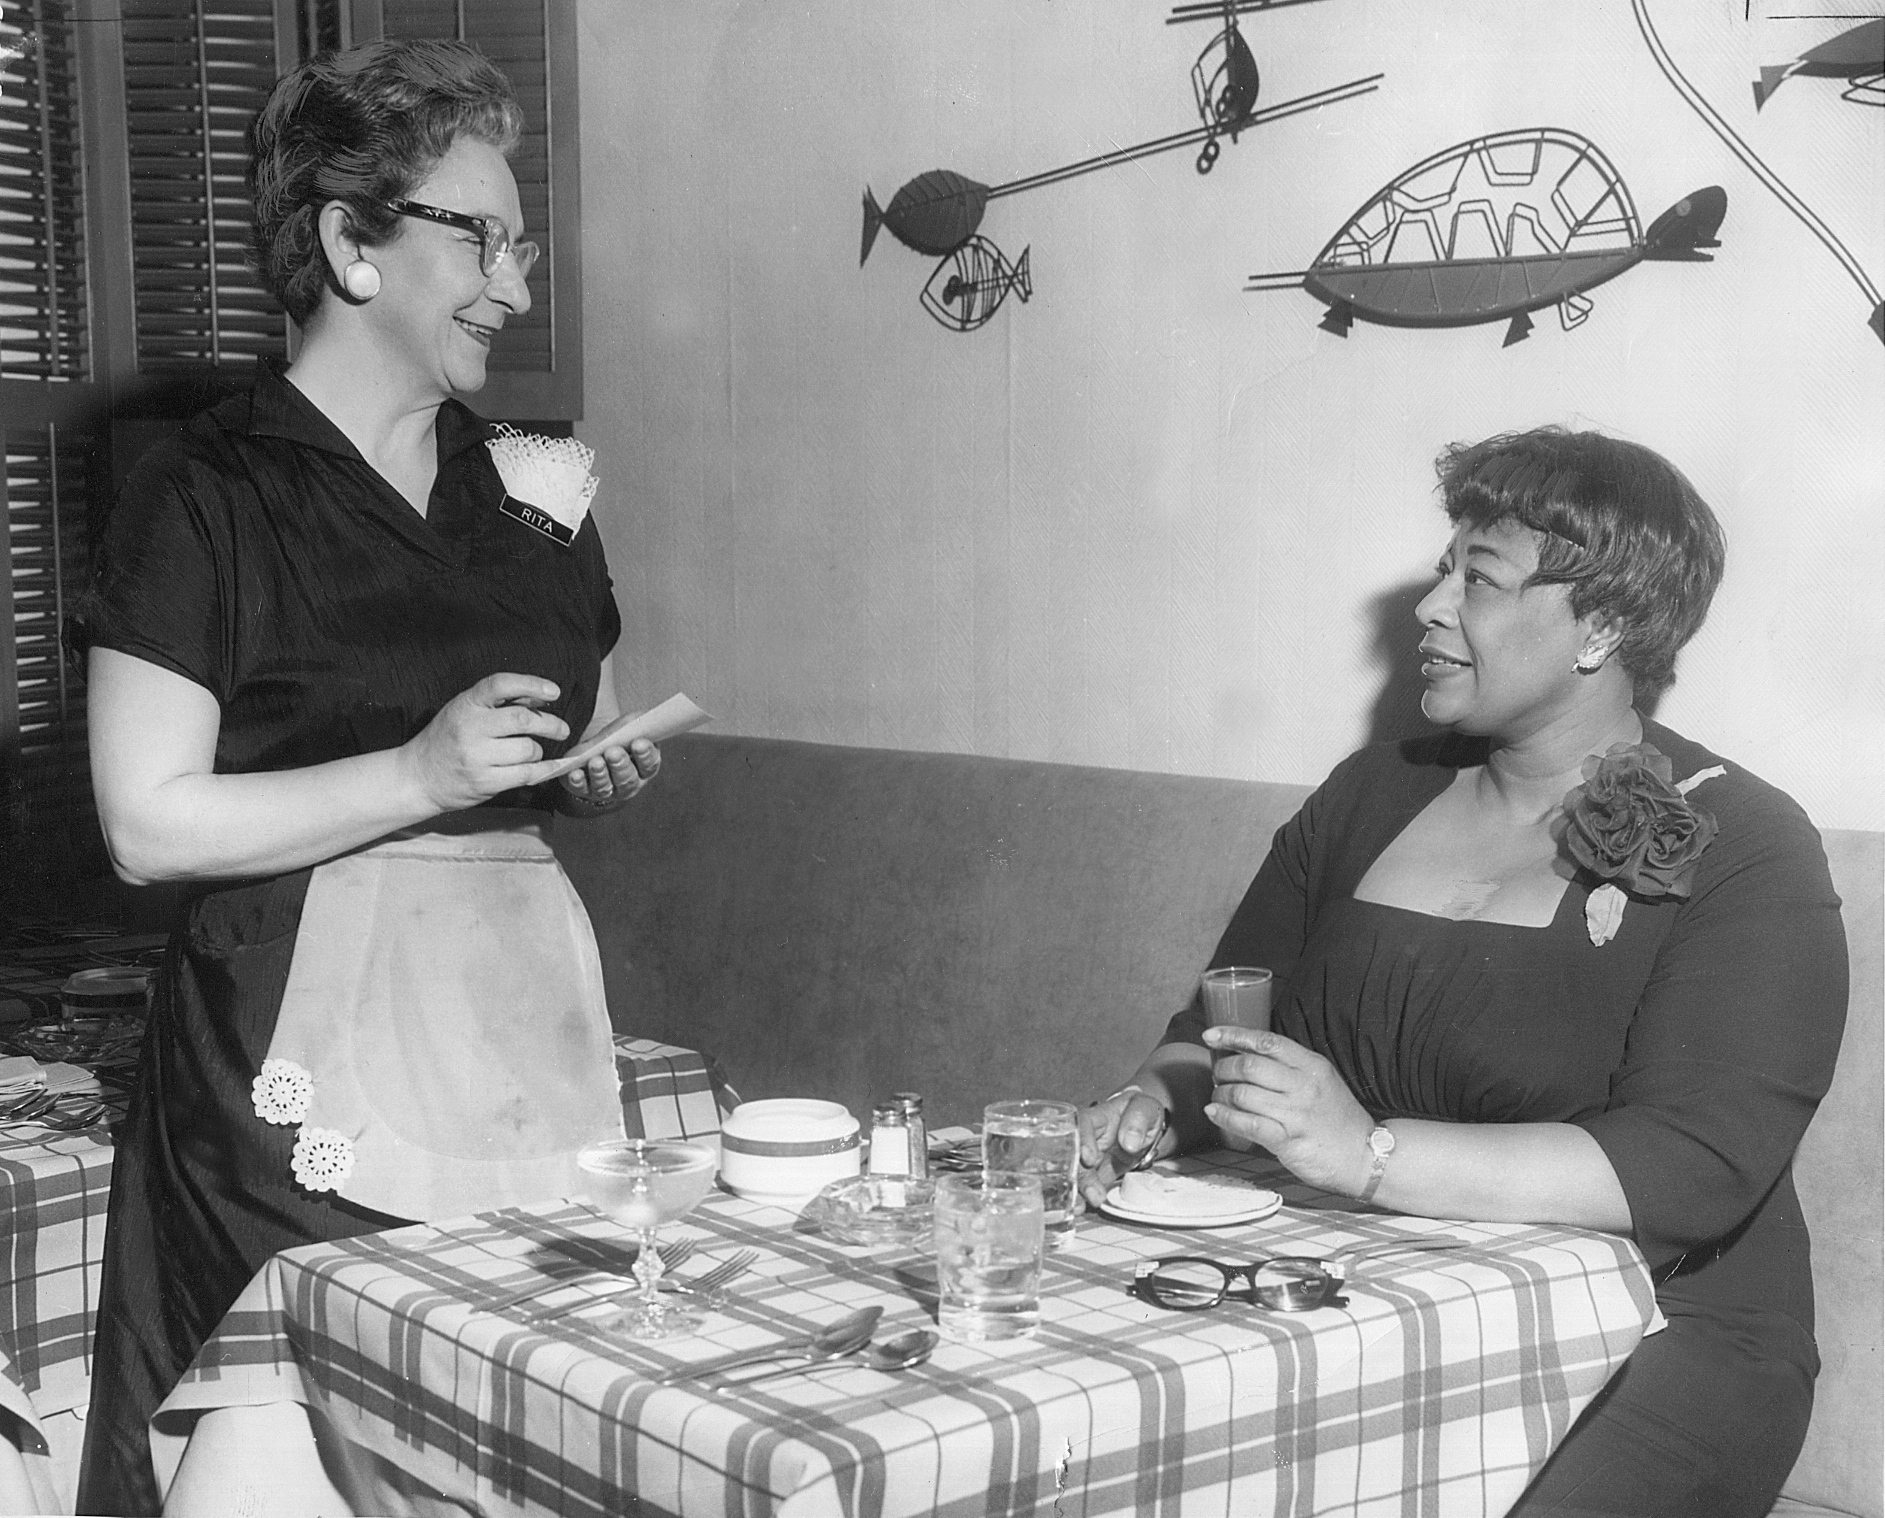 Ella Fitzgerald is intentionally photographed for the Appleton Post-Crescent in 1961 having breakfast at the Conway Hotel to illustrate more open access to Black people.